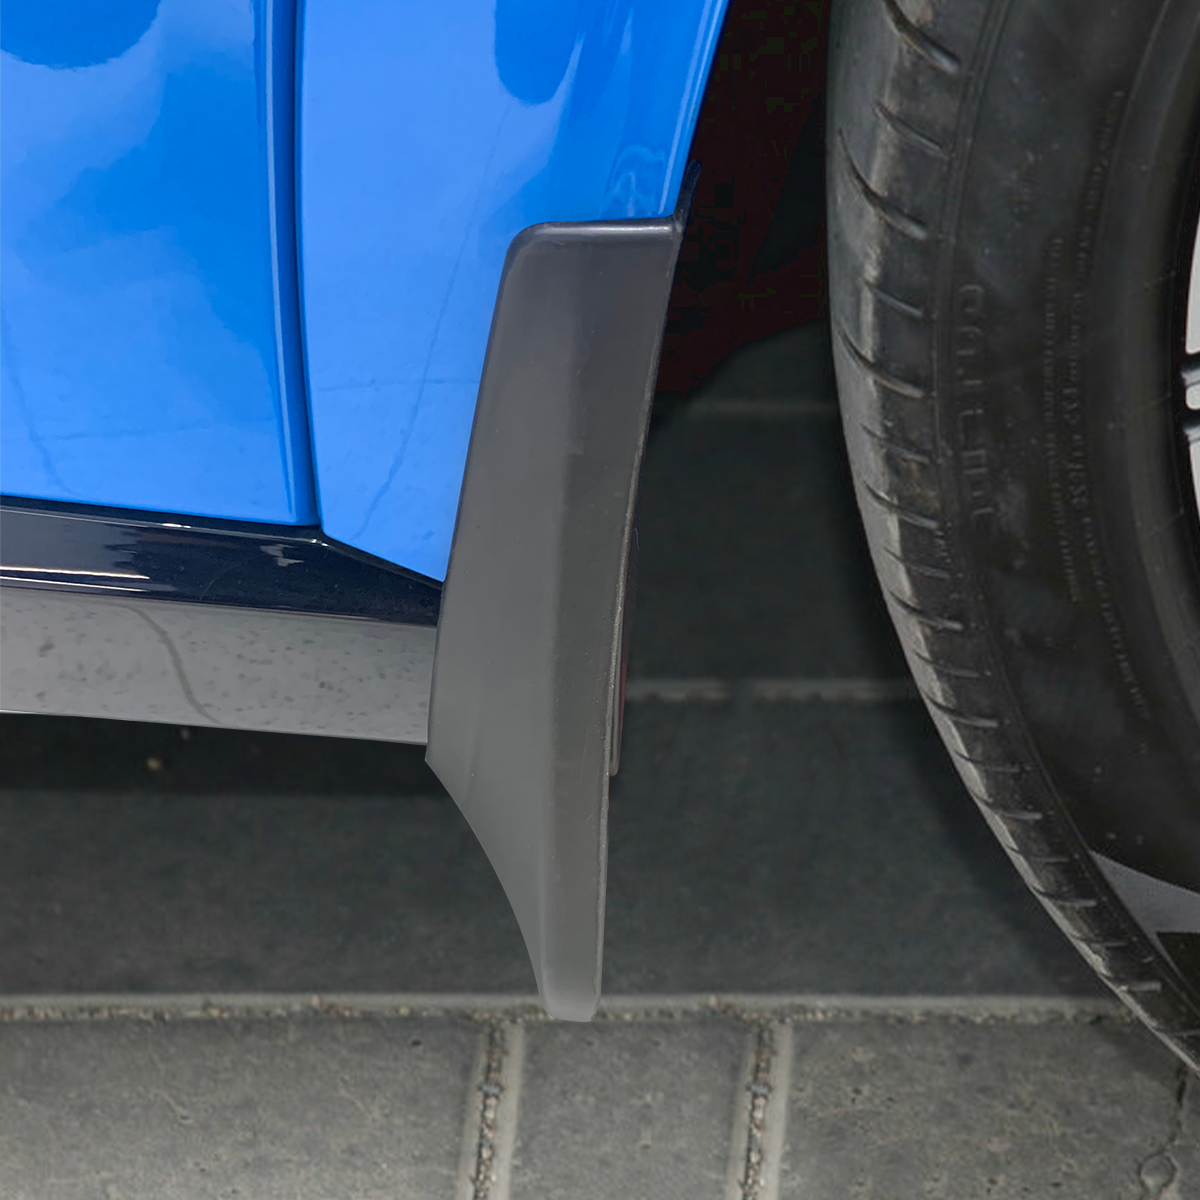 Mach-E Mud Flaps Splash Guards from AOSK